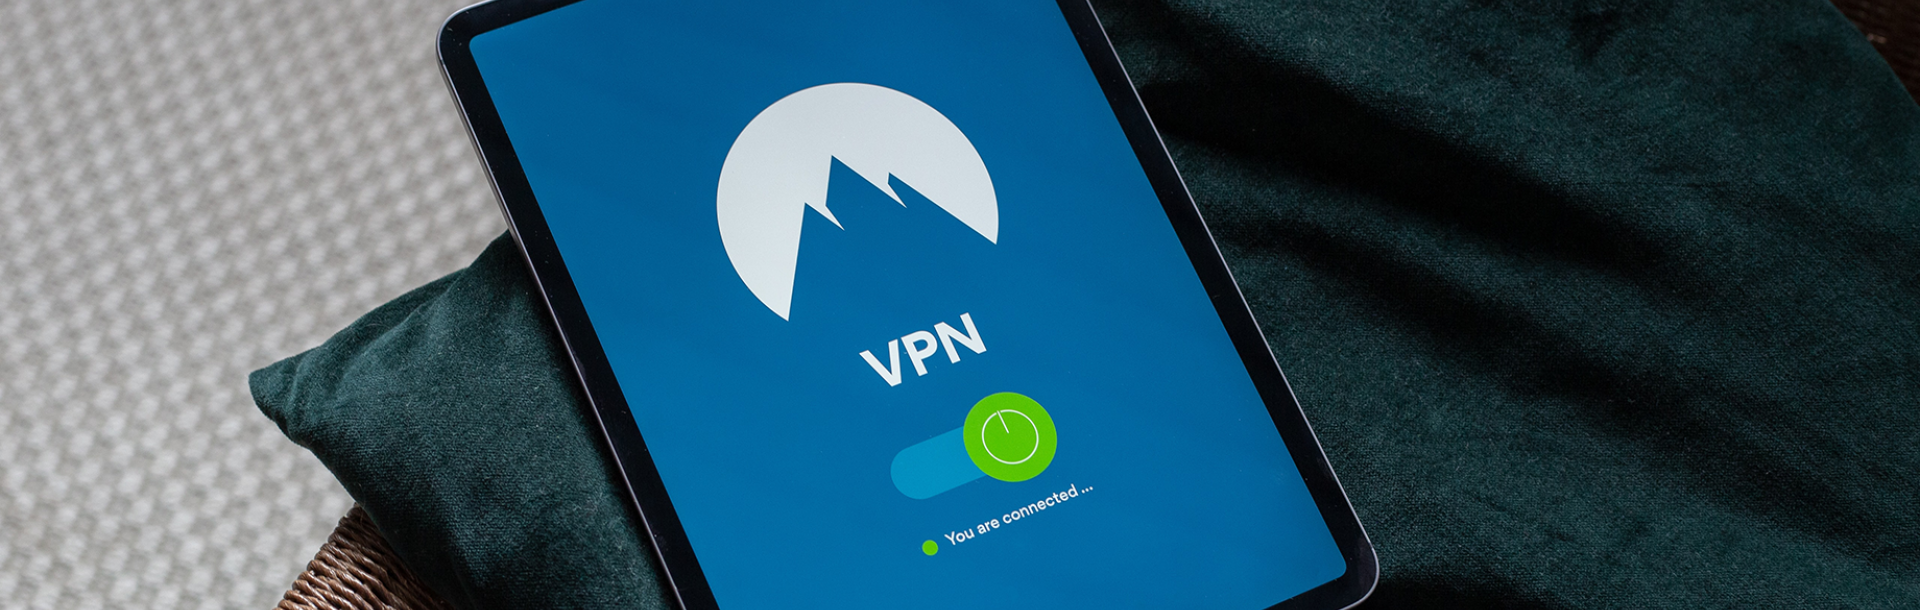 Cisco&#039;s current VPN service will continue to be available until September 30, 2021. We have included here an explanation of Palo Alto Networks&#039; new service